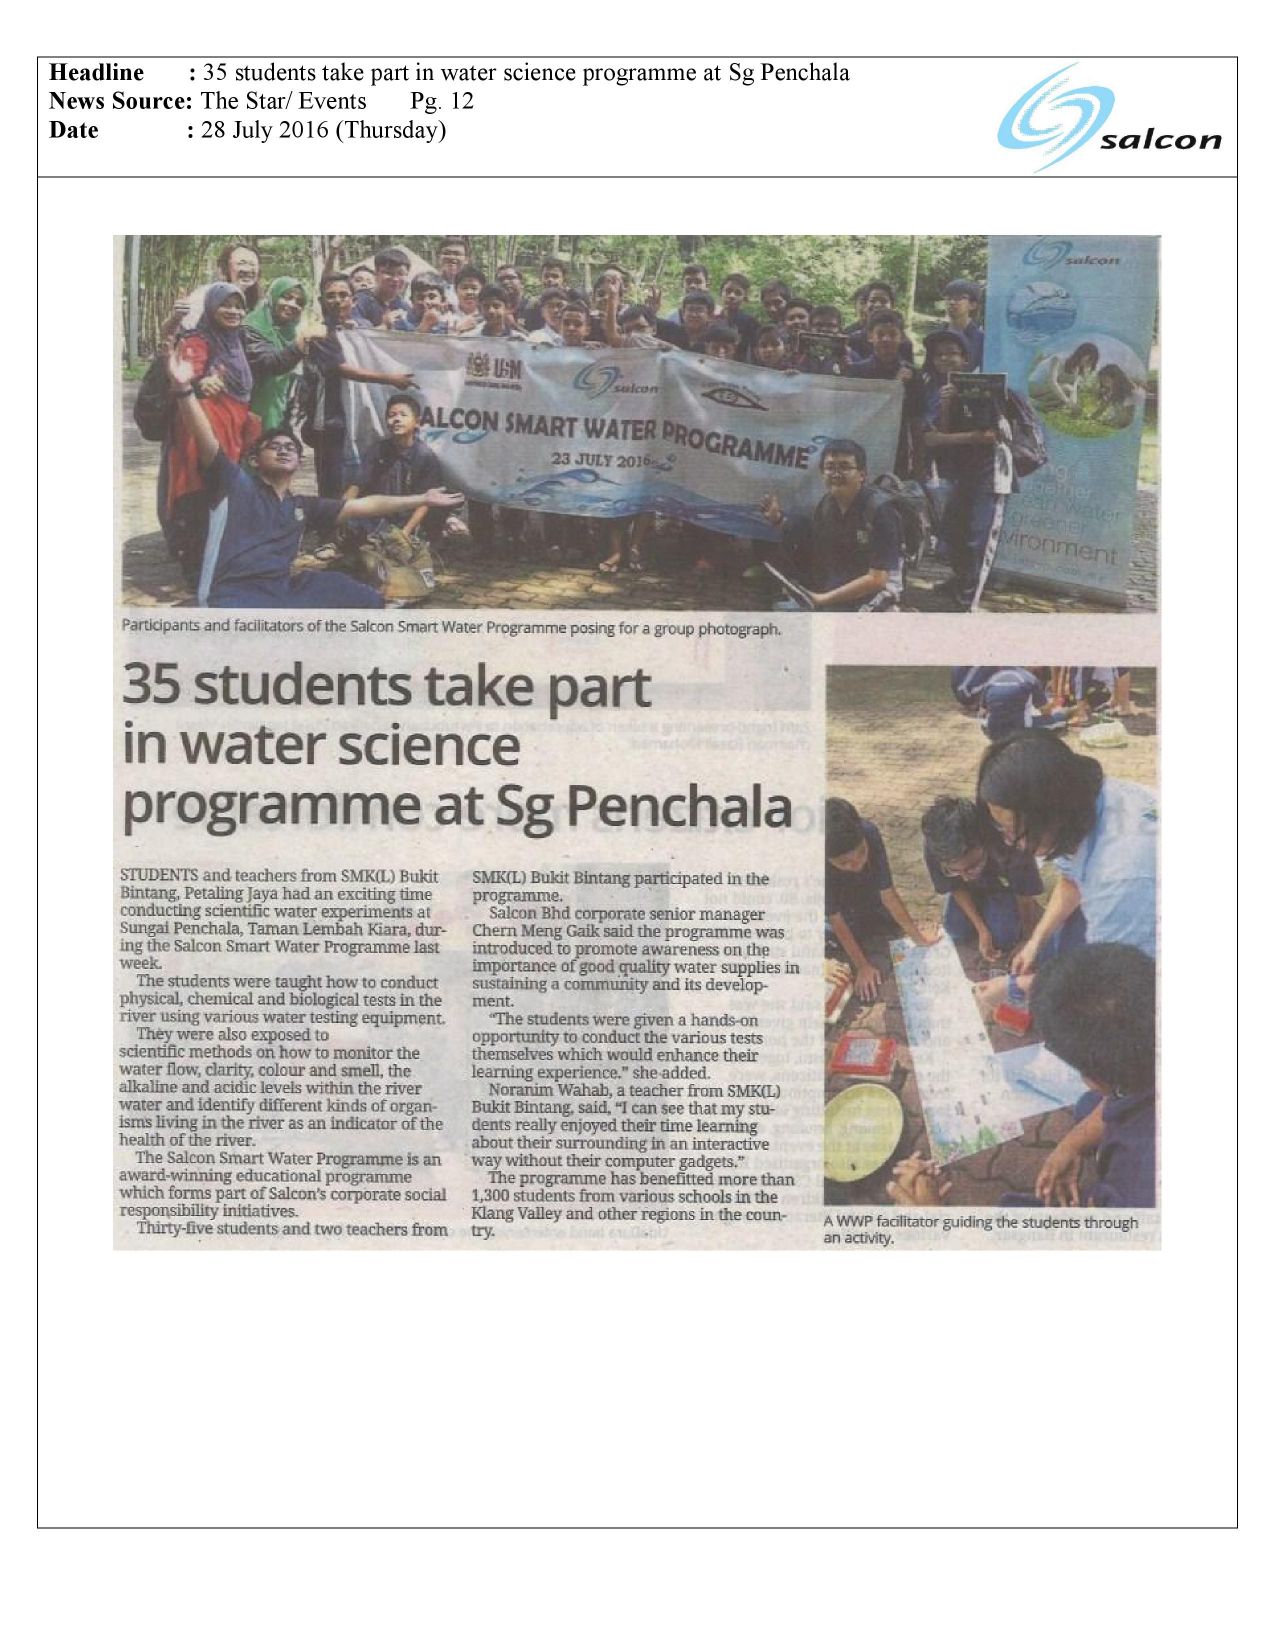 35 students take part in water science programme at Sg Penchala